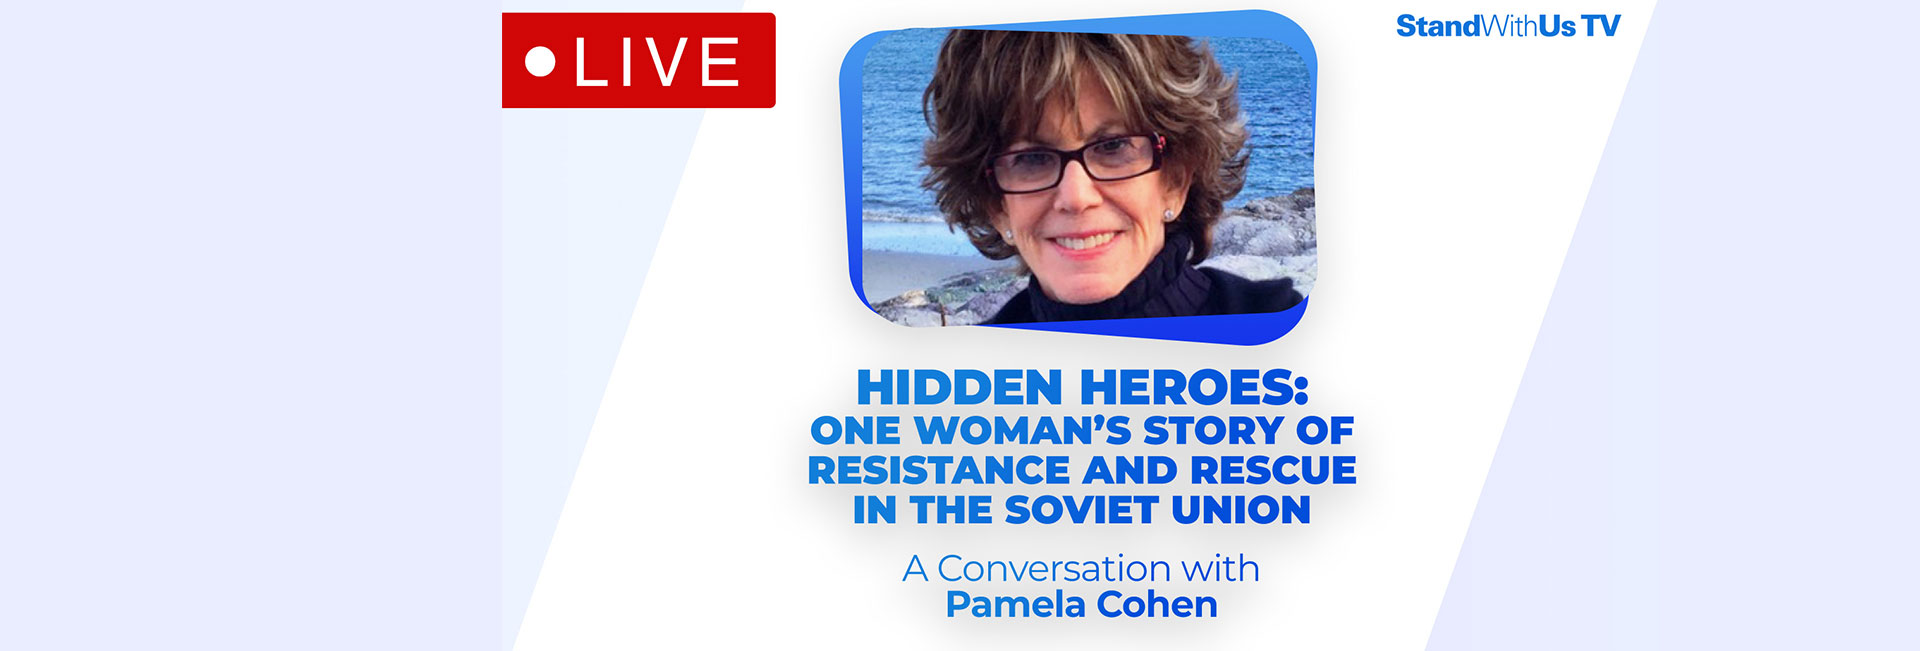 Hidden Heroes: One Woman’s Story of Resistance and Rescue in The Soviet Union